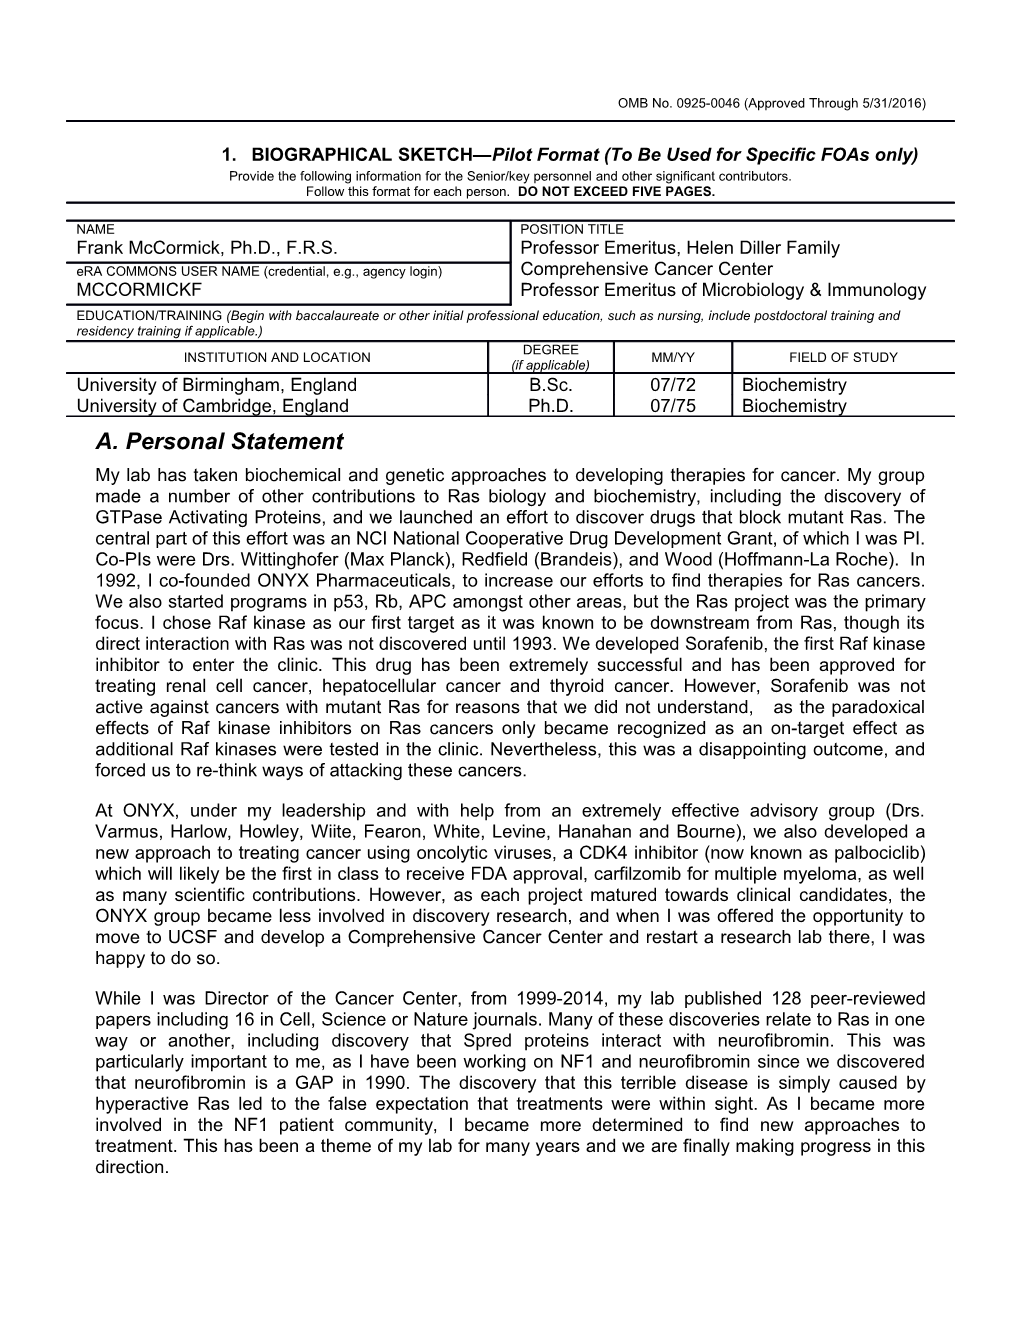 OMB No. 0925-0046, Biographical Sketch - Pilot Format Page